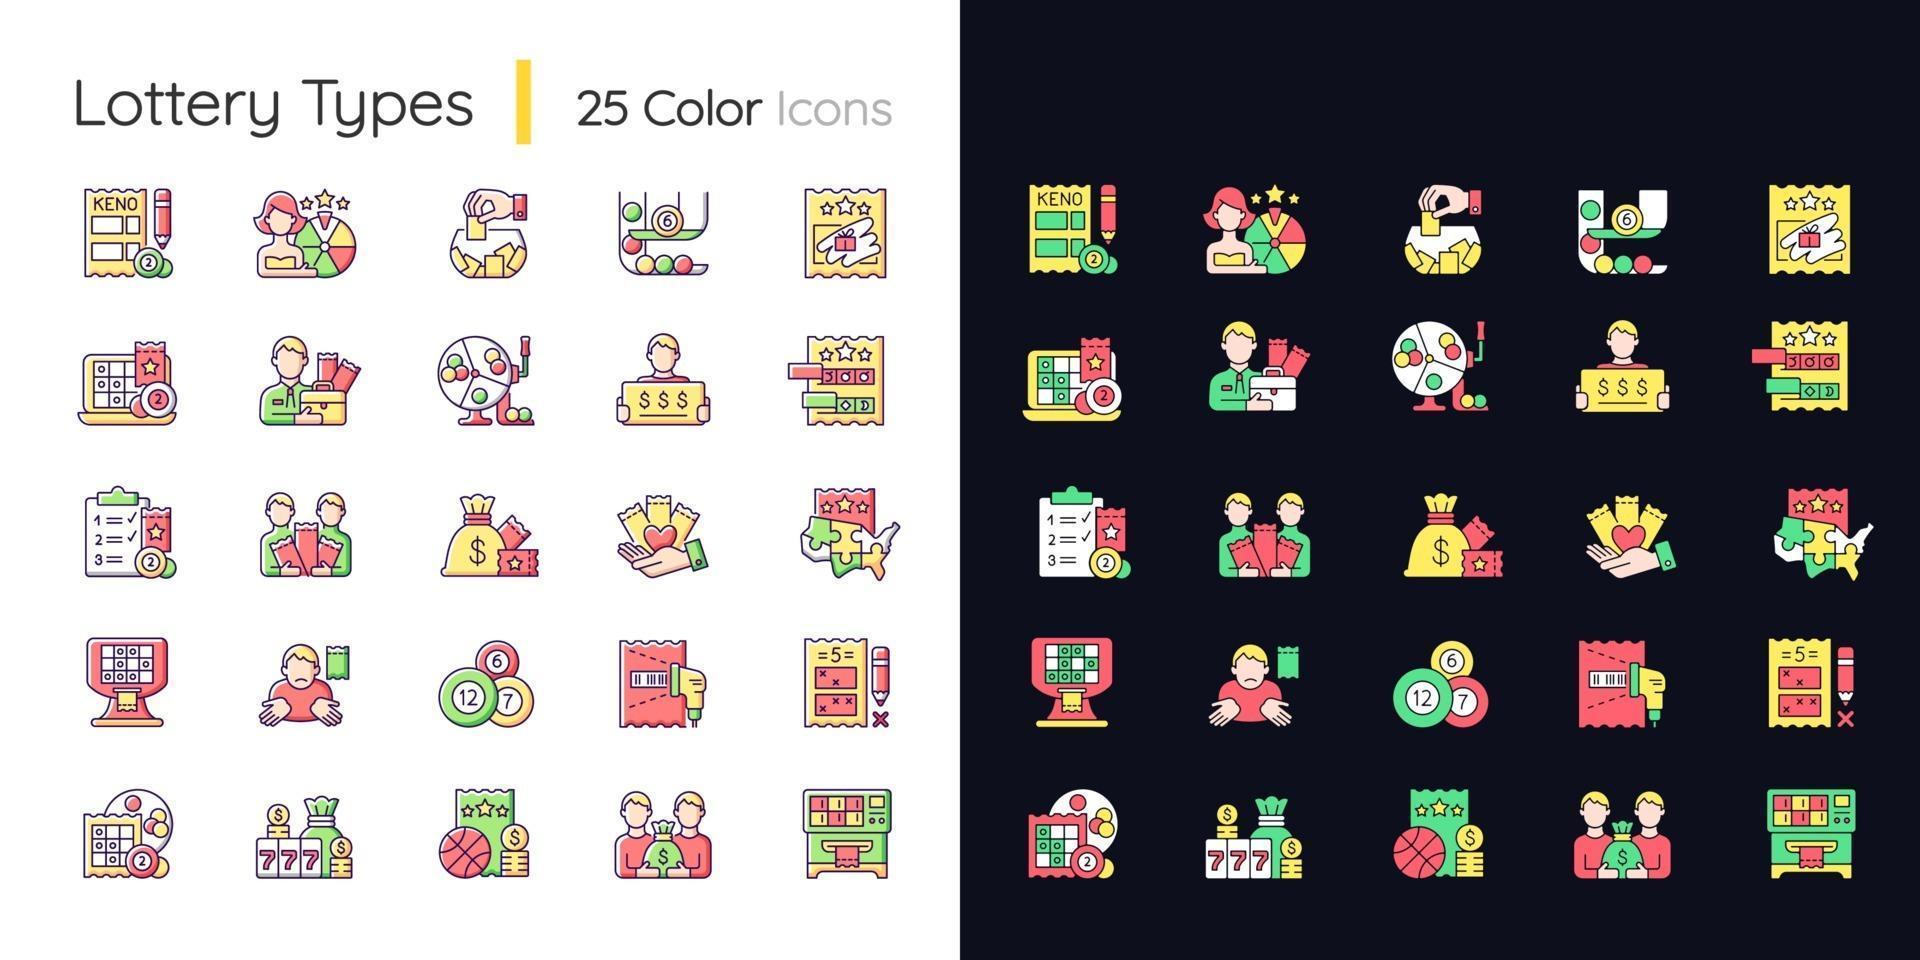 Lottery types light and dark theme RGB color icons set vector